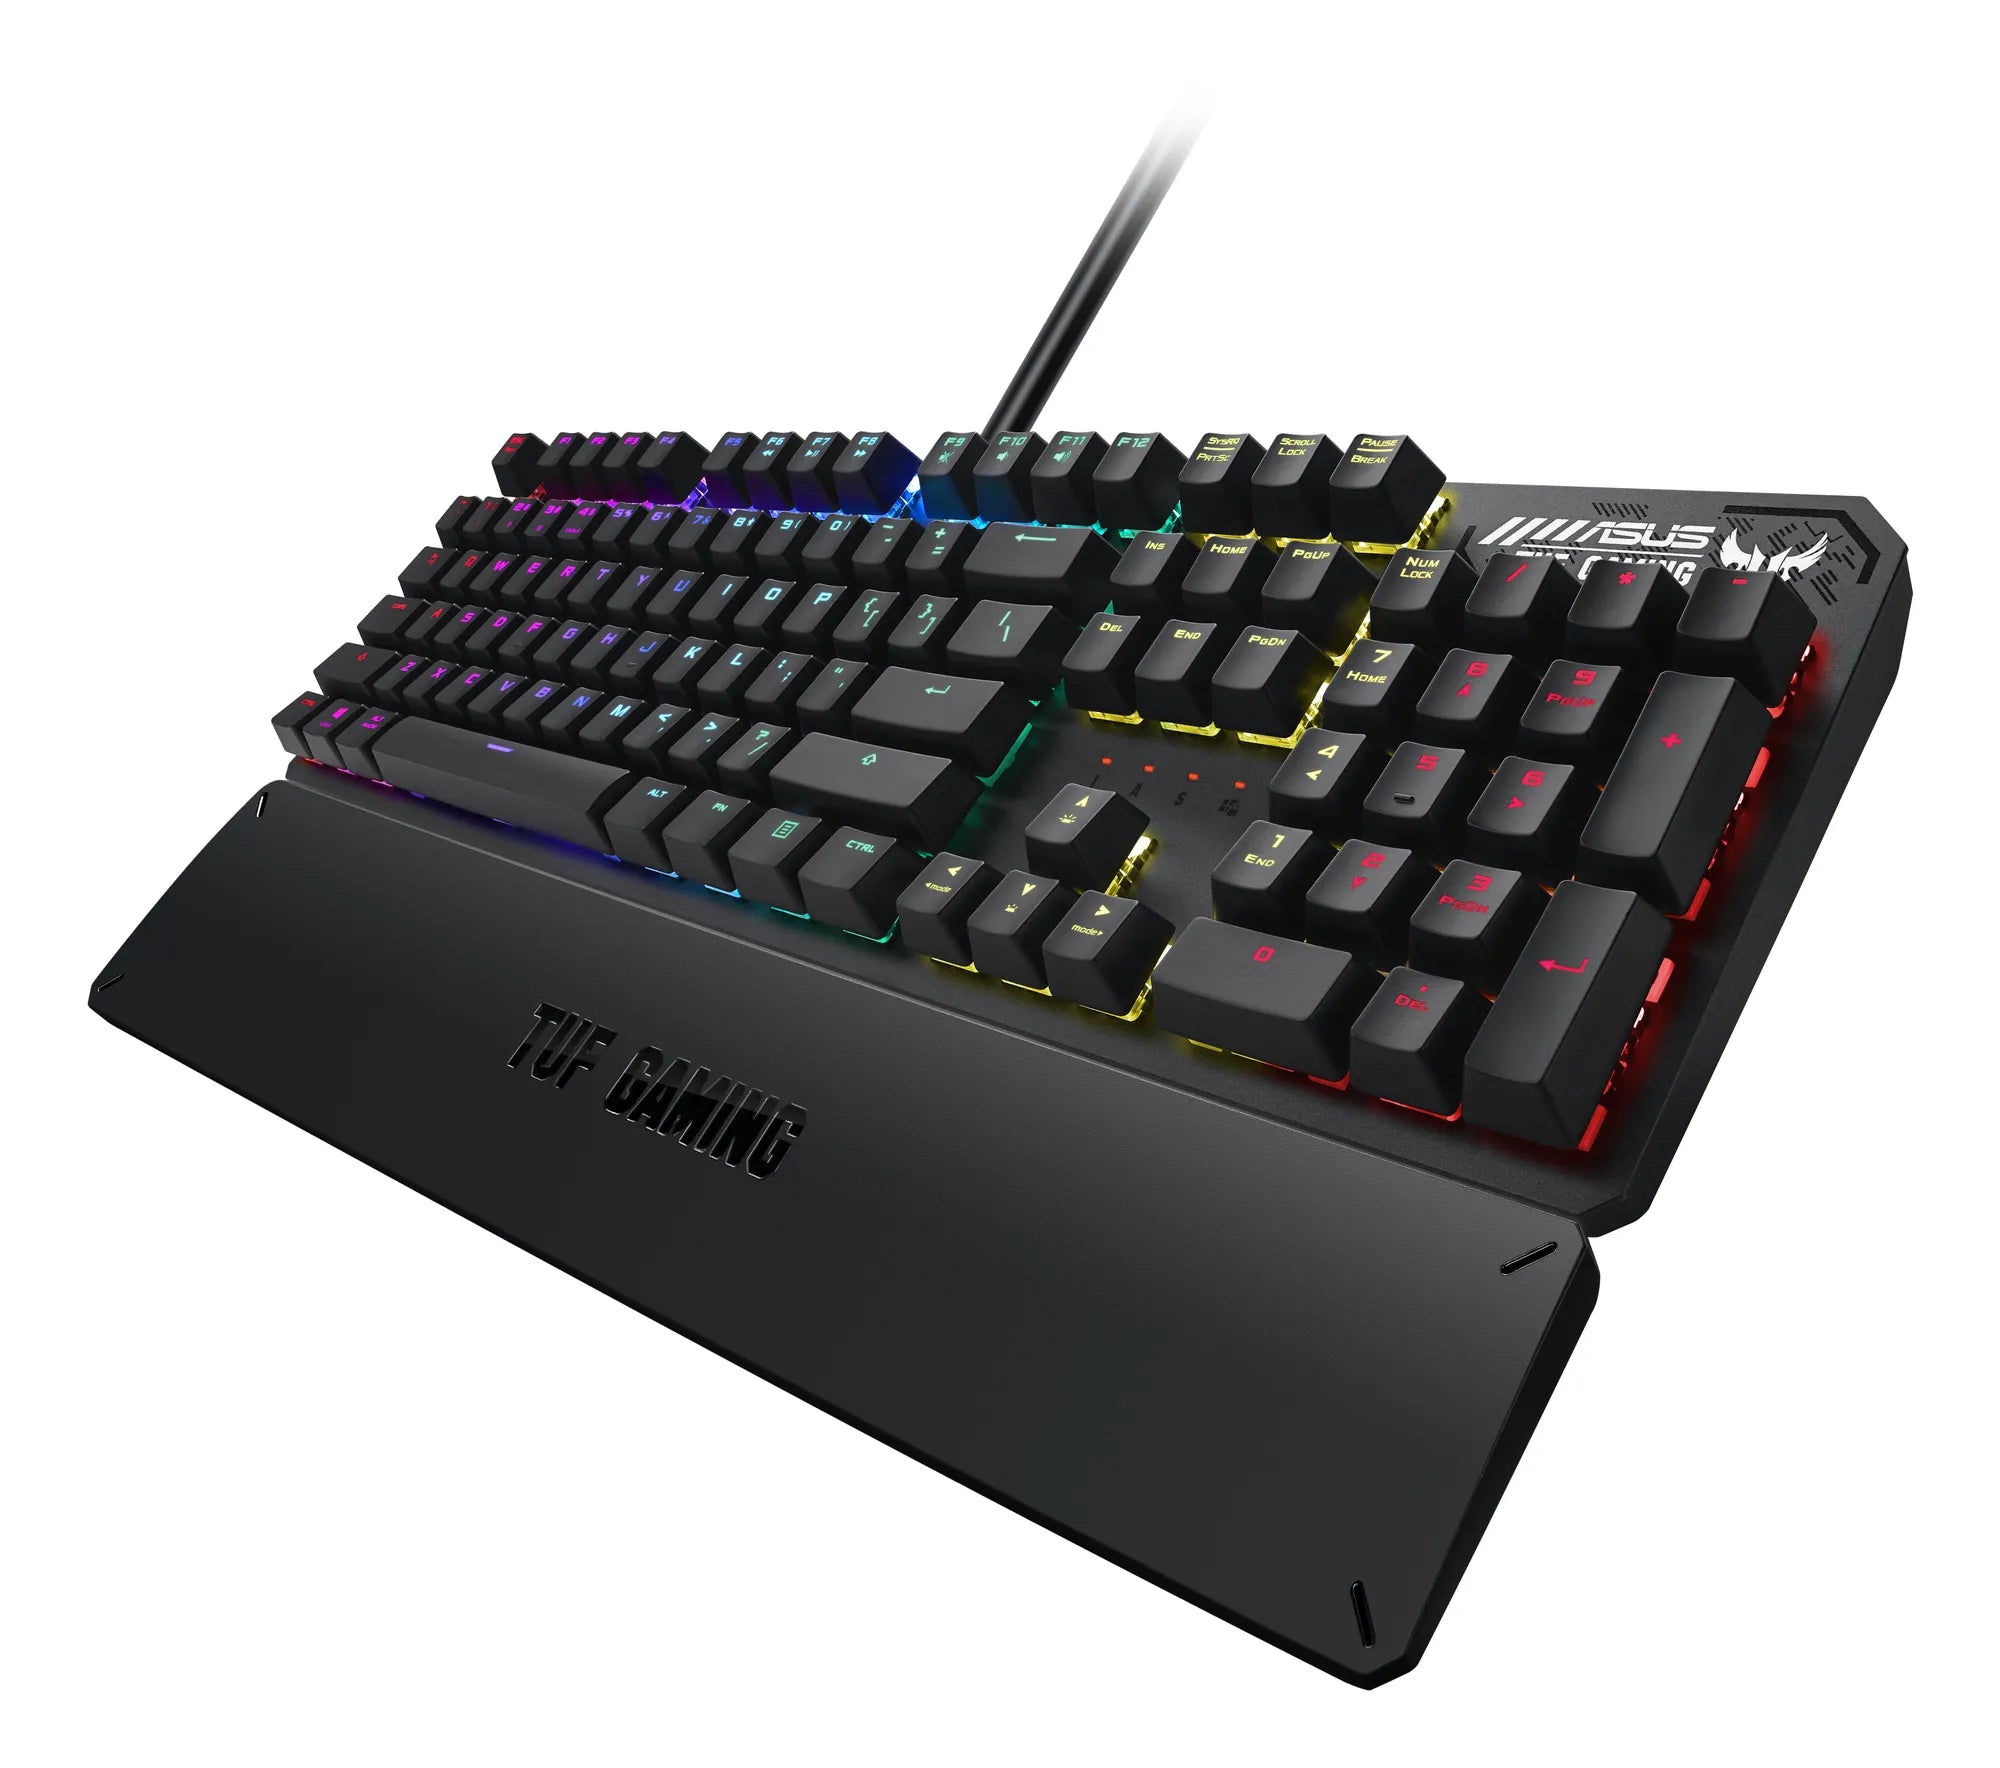 ASUS-TUF-Gaming-K3-RGB-mechanical-keyboard-with-N-key-rollover;-combination-media-keys;-USB-2.0-passthrough;-aluminum-alloy-top-